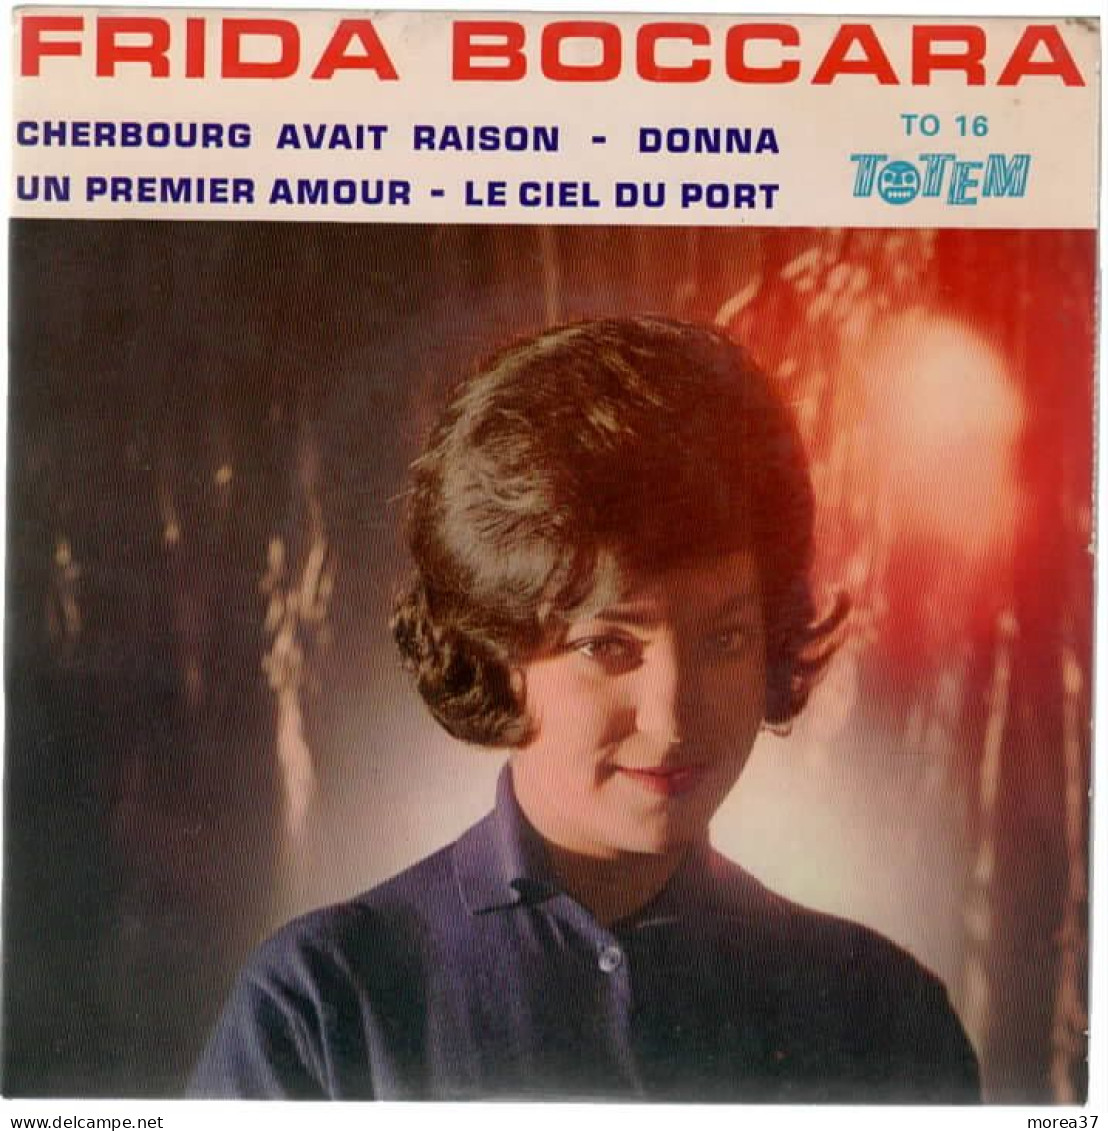 FRIDA BOCCARA   Cherbourg Avait Raison    TOTEM TO 16 - Other - French Music